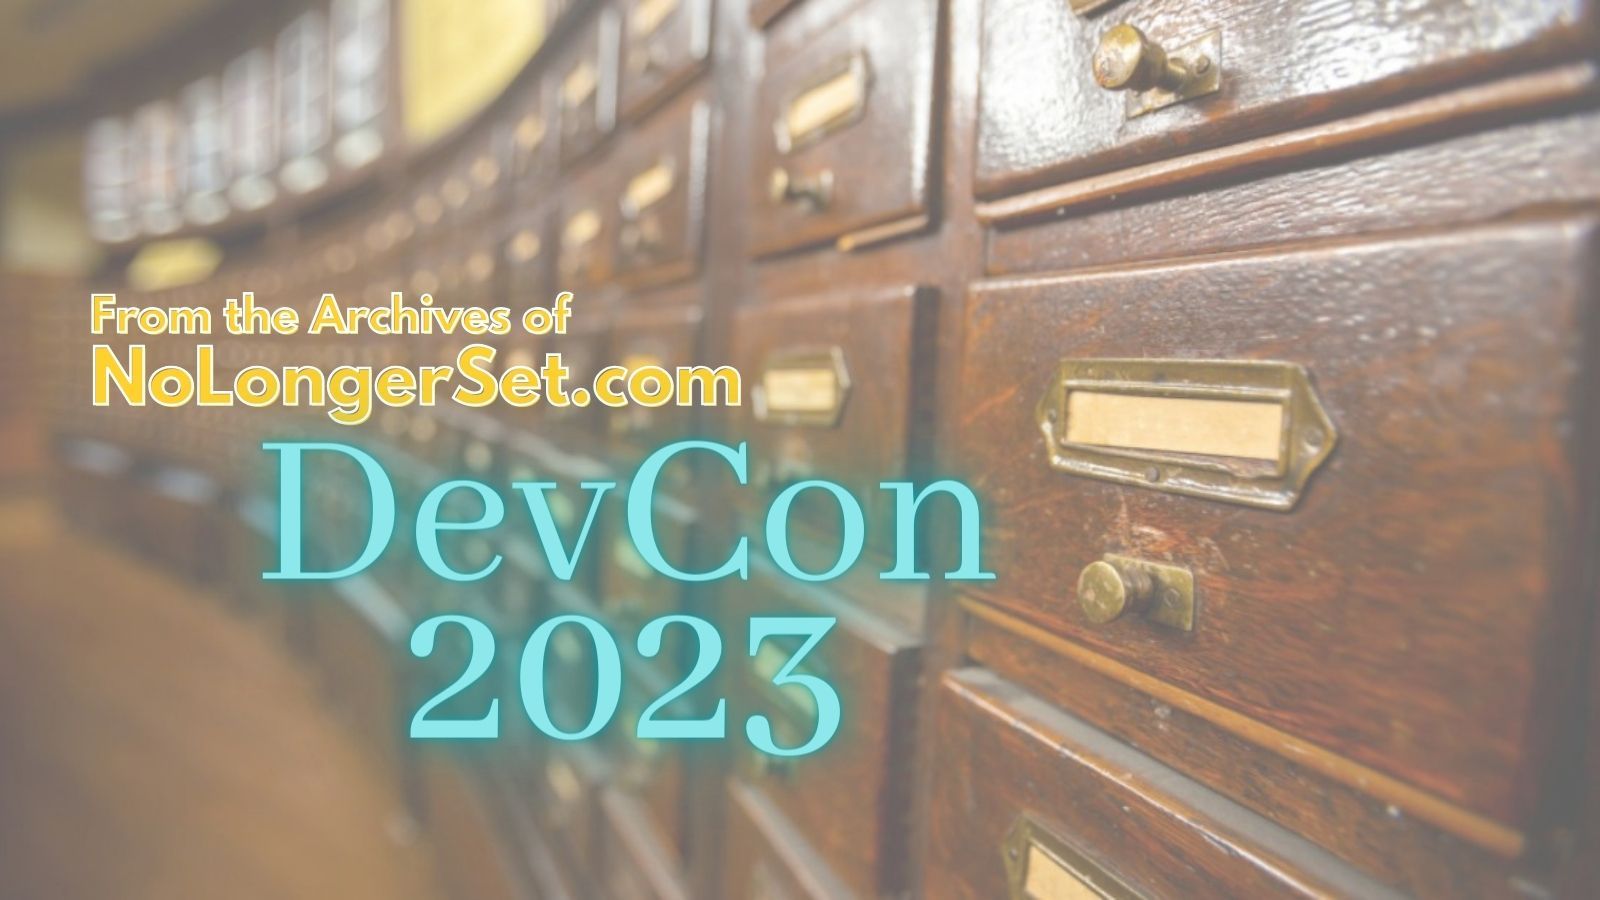 Archive Collection: DevCon 2023